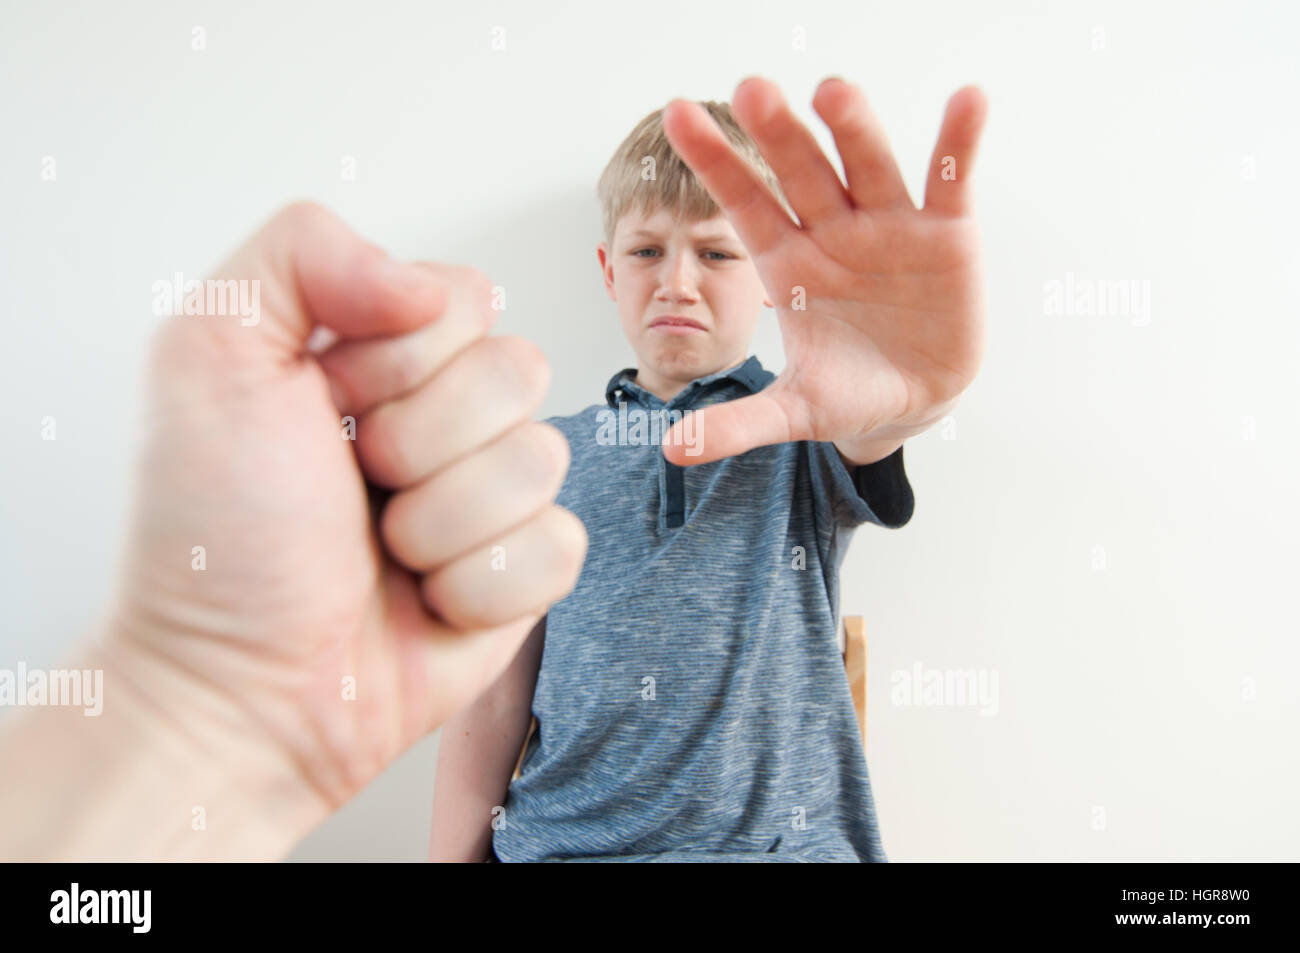 Point of view image of a parent raising their fist to a little child Stock Photo